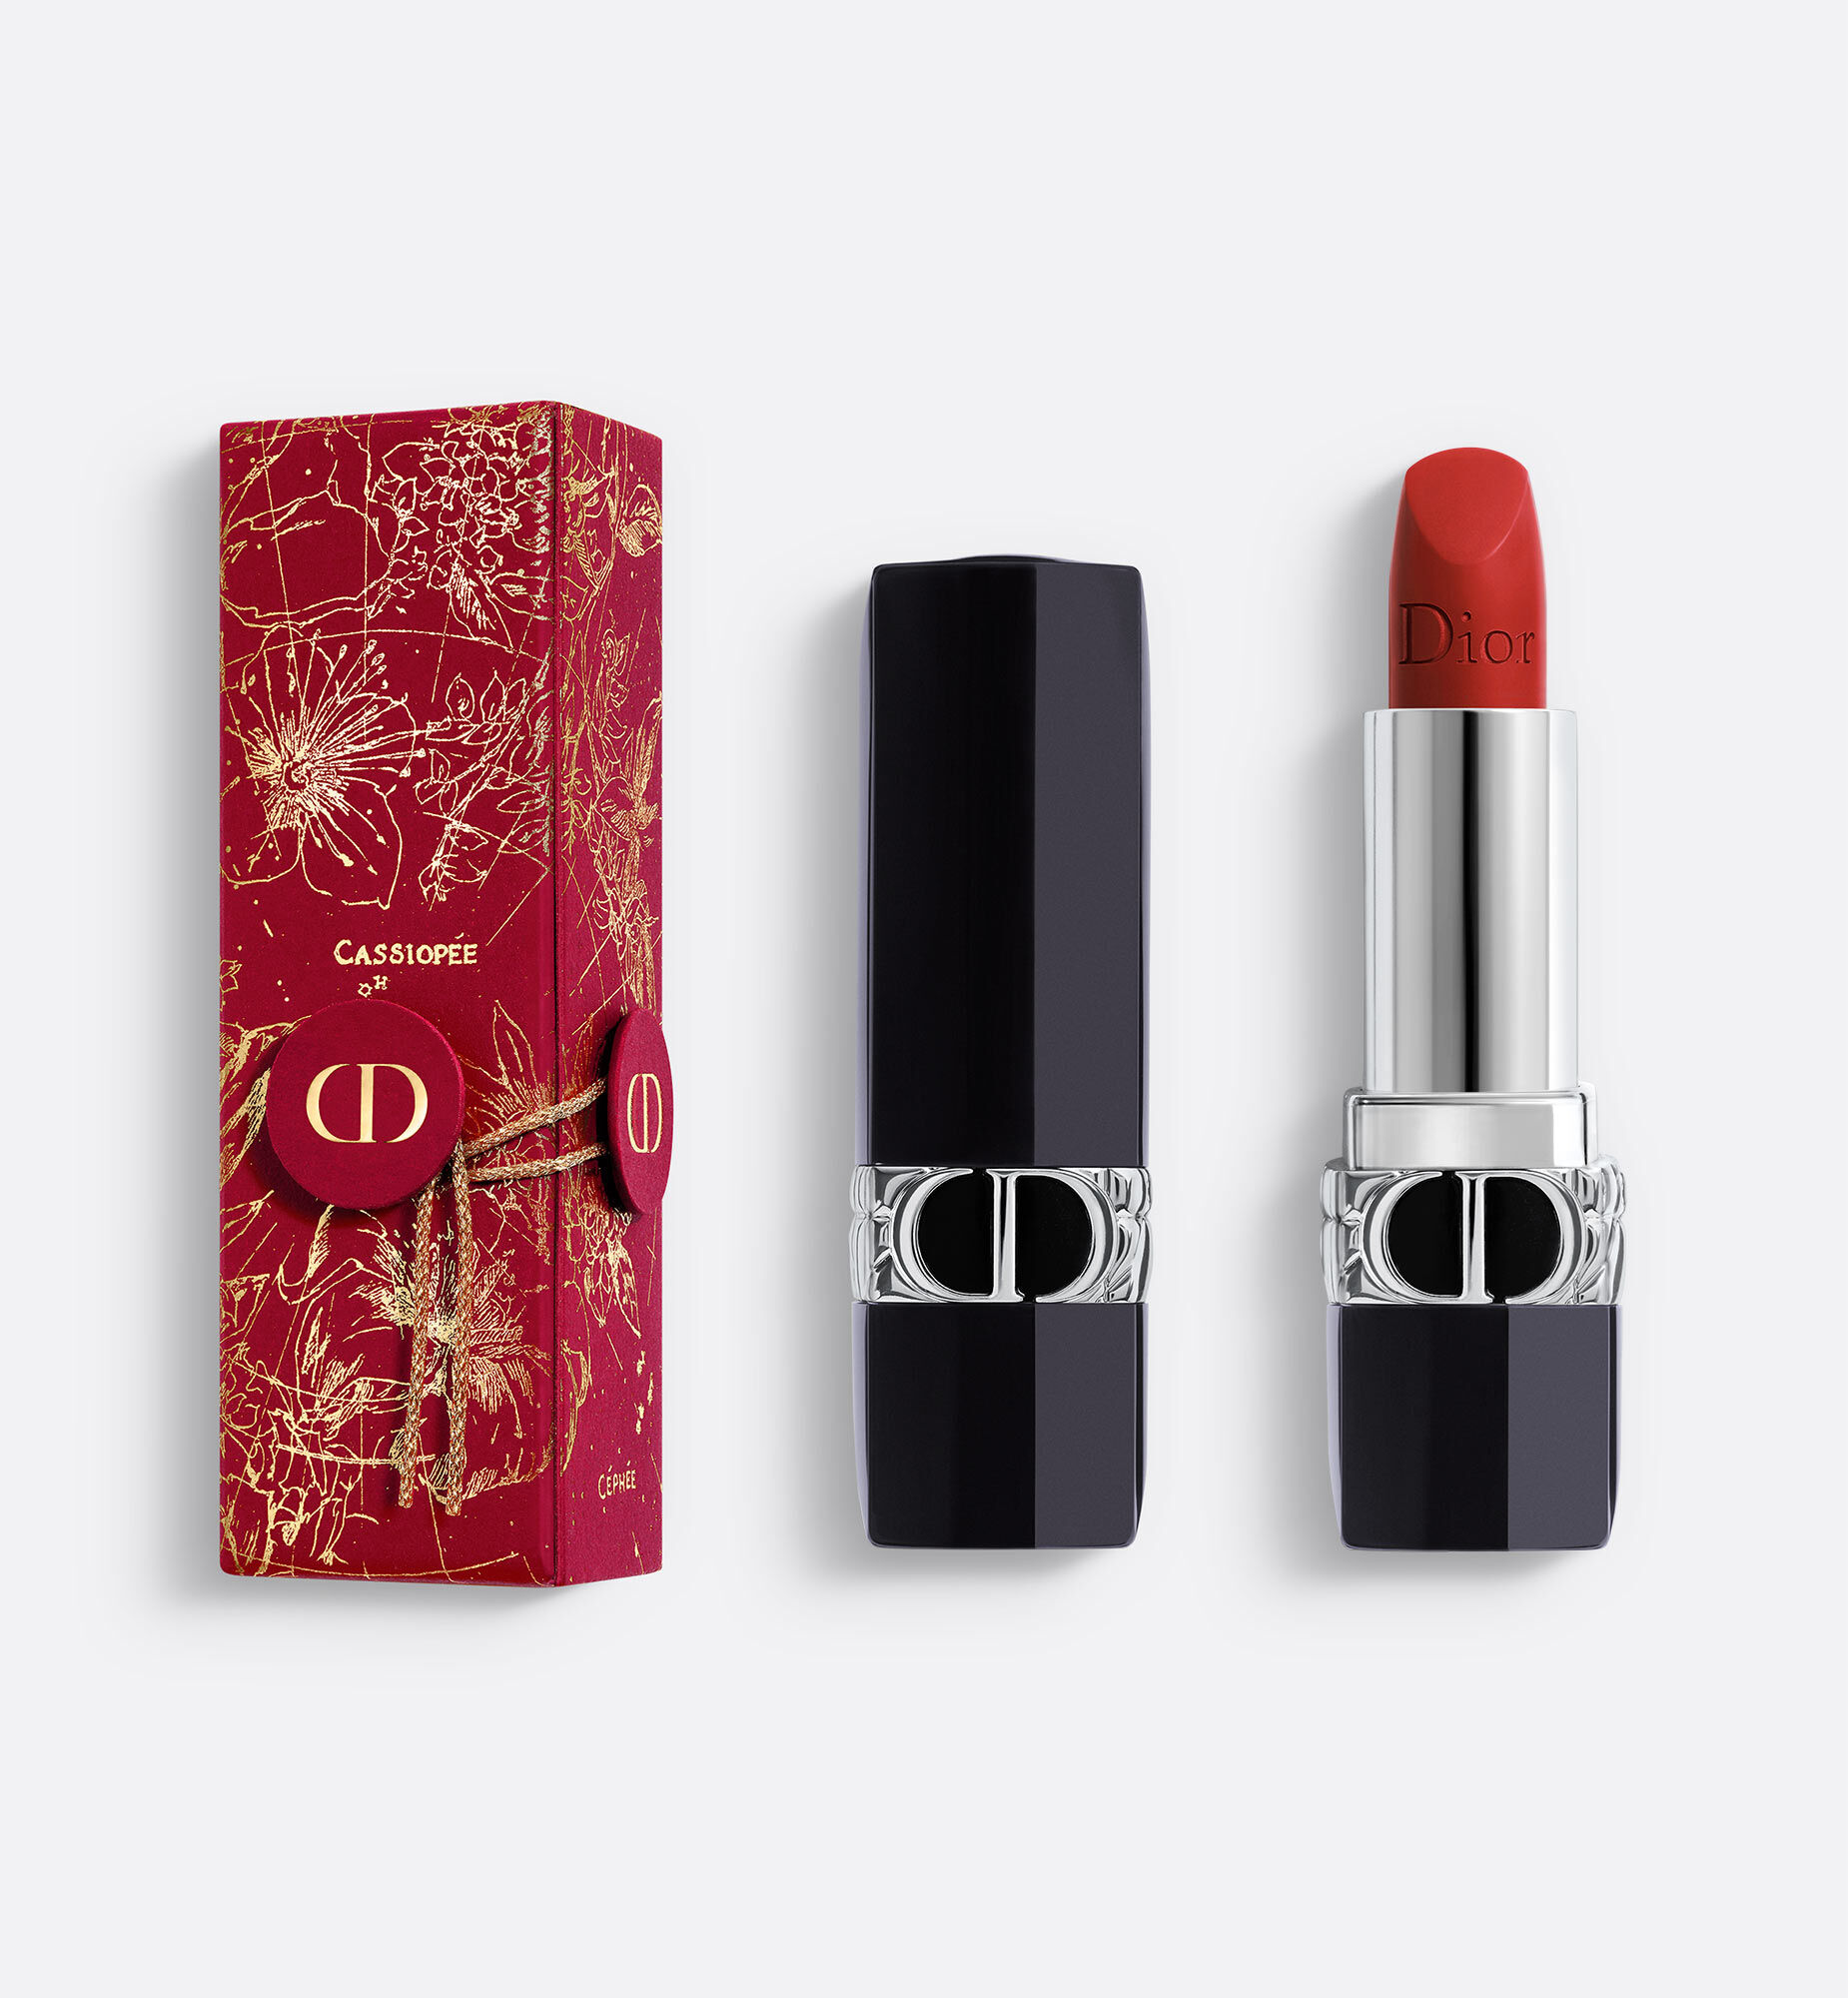 Dior Celebrates the Chinese Lunar New Year With a LimitedEdition Capsule  Collection  PurseBlog  Dior Fashion Celebrities